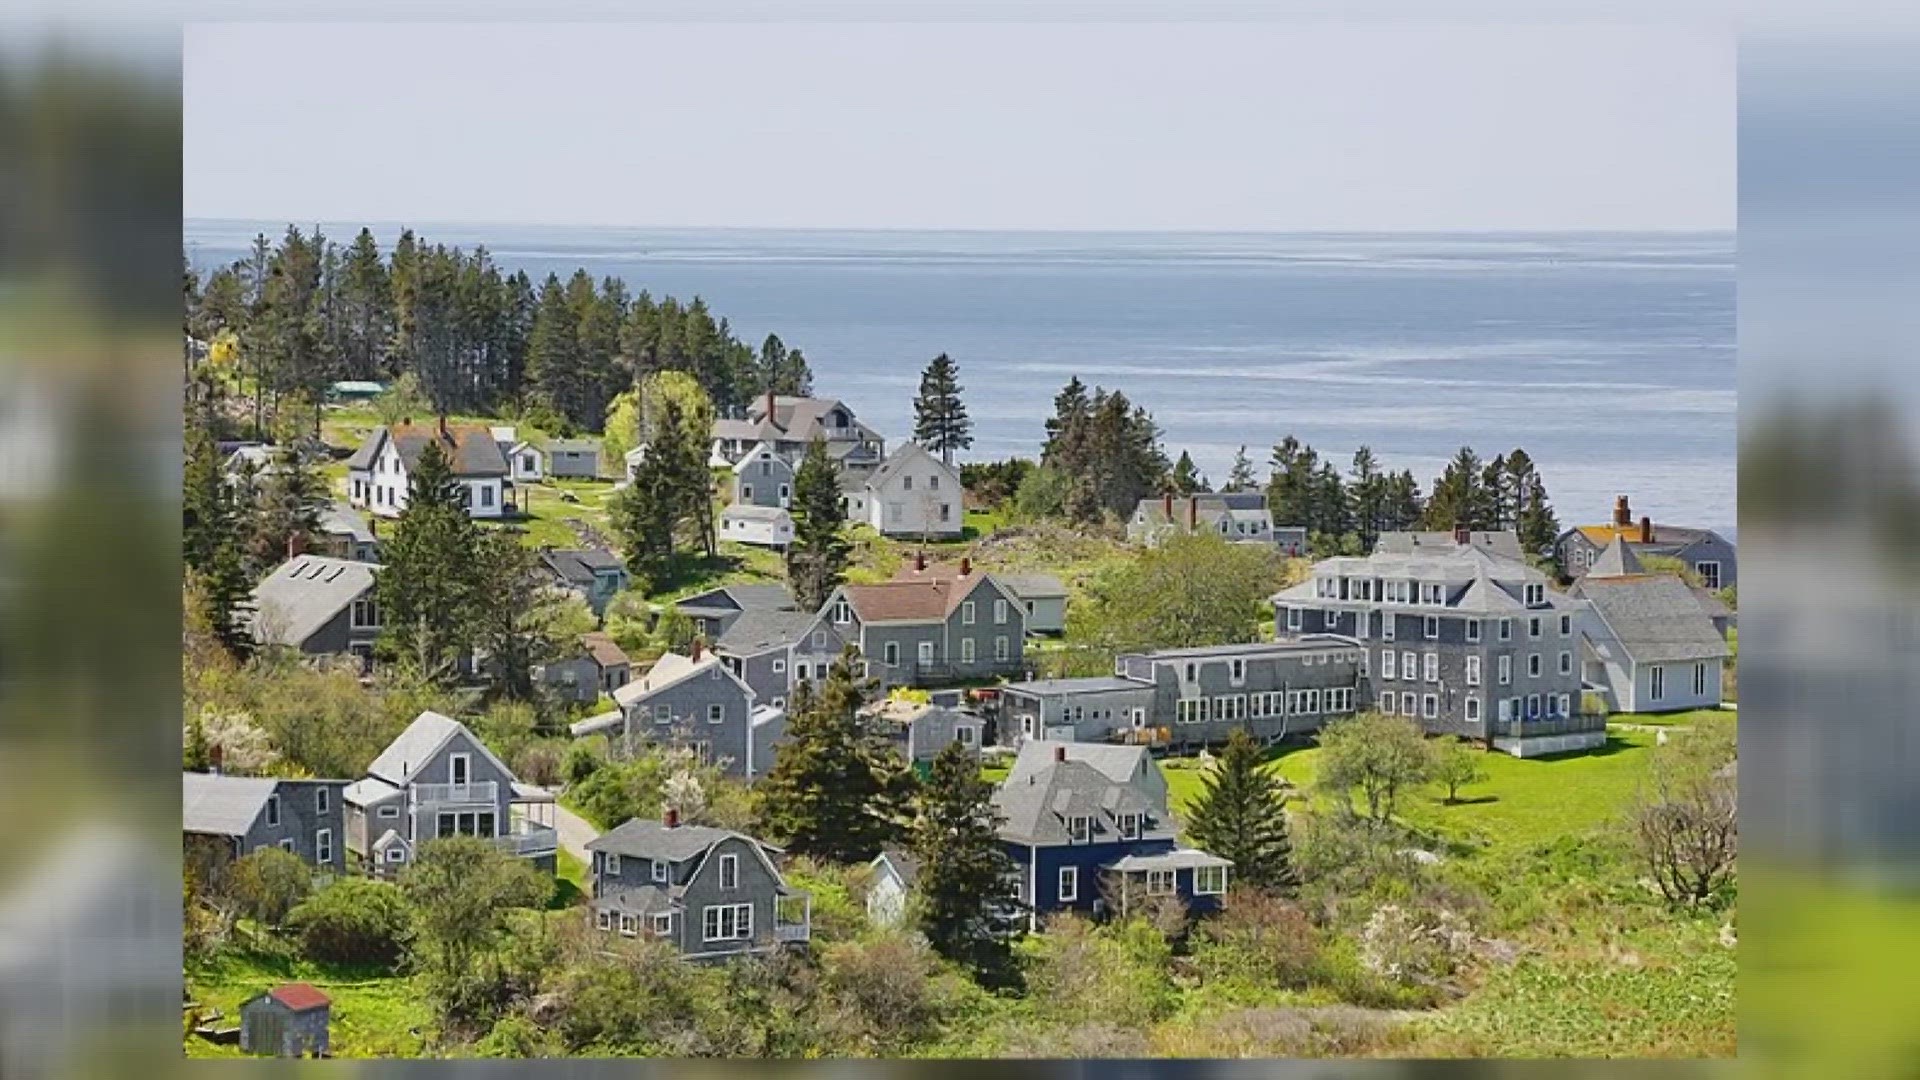 Structures on Matinicus Island, Monhegan Island, and Ragged Island, among other locations, could be affected by sea level rise, the report found.